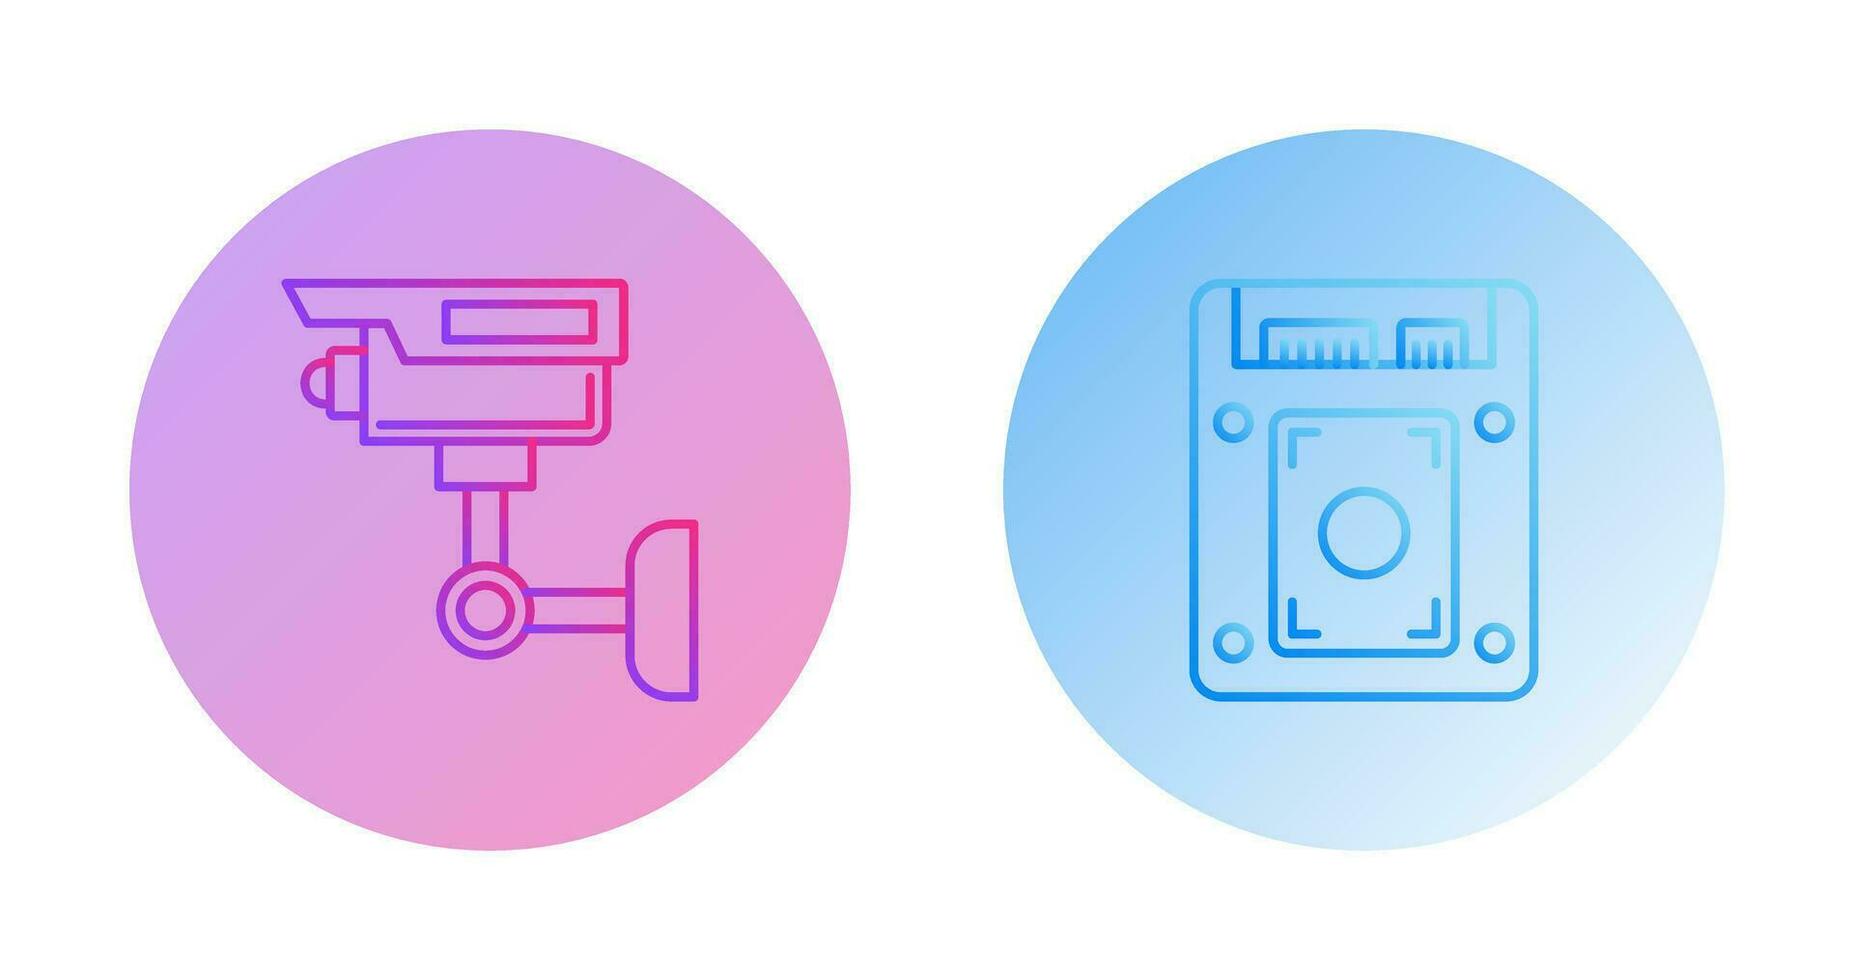 CcTv and Ssd Icon vector